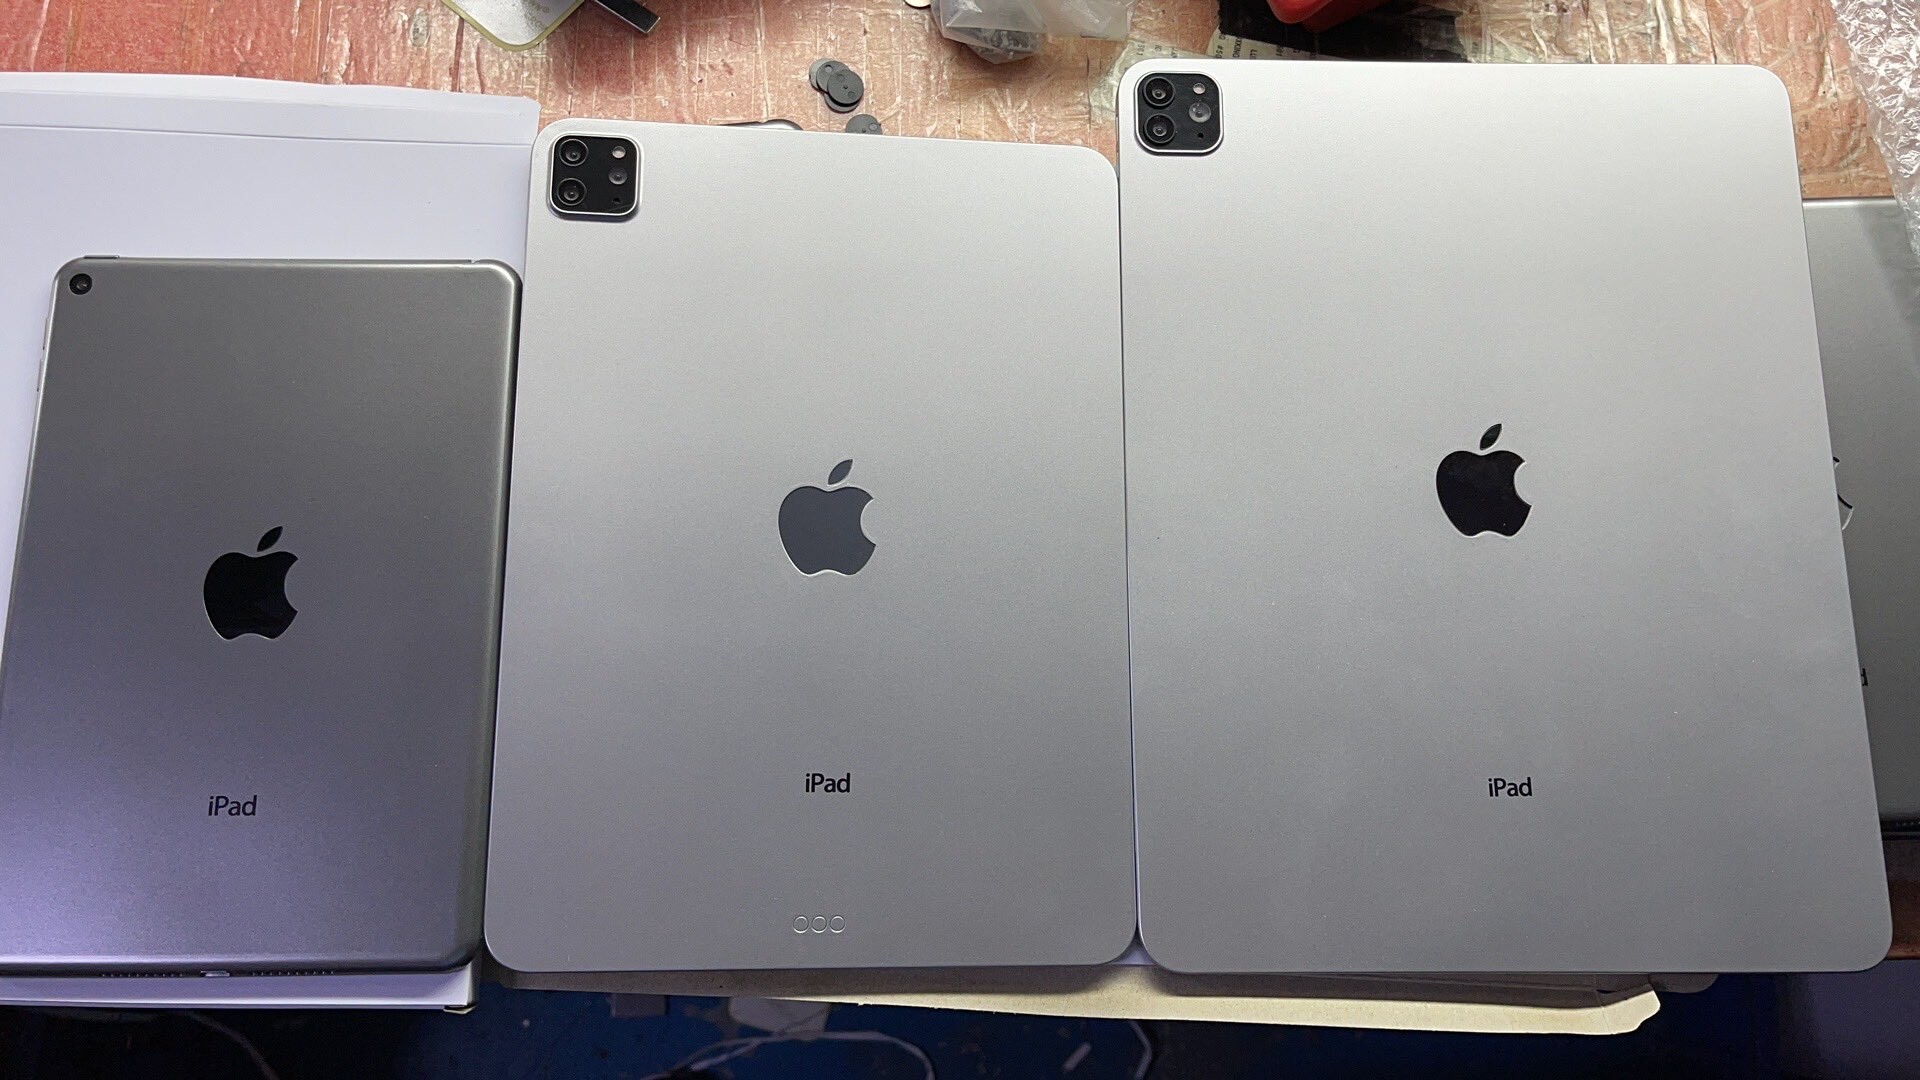 Leaked show the presumed designs of Apple's iPad Pro iPad mini tablets - NotebookCheck.net News